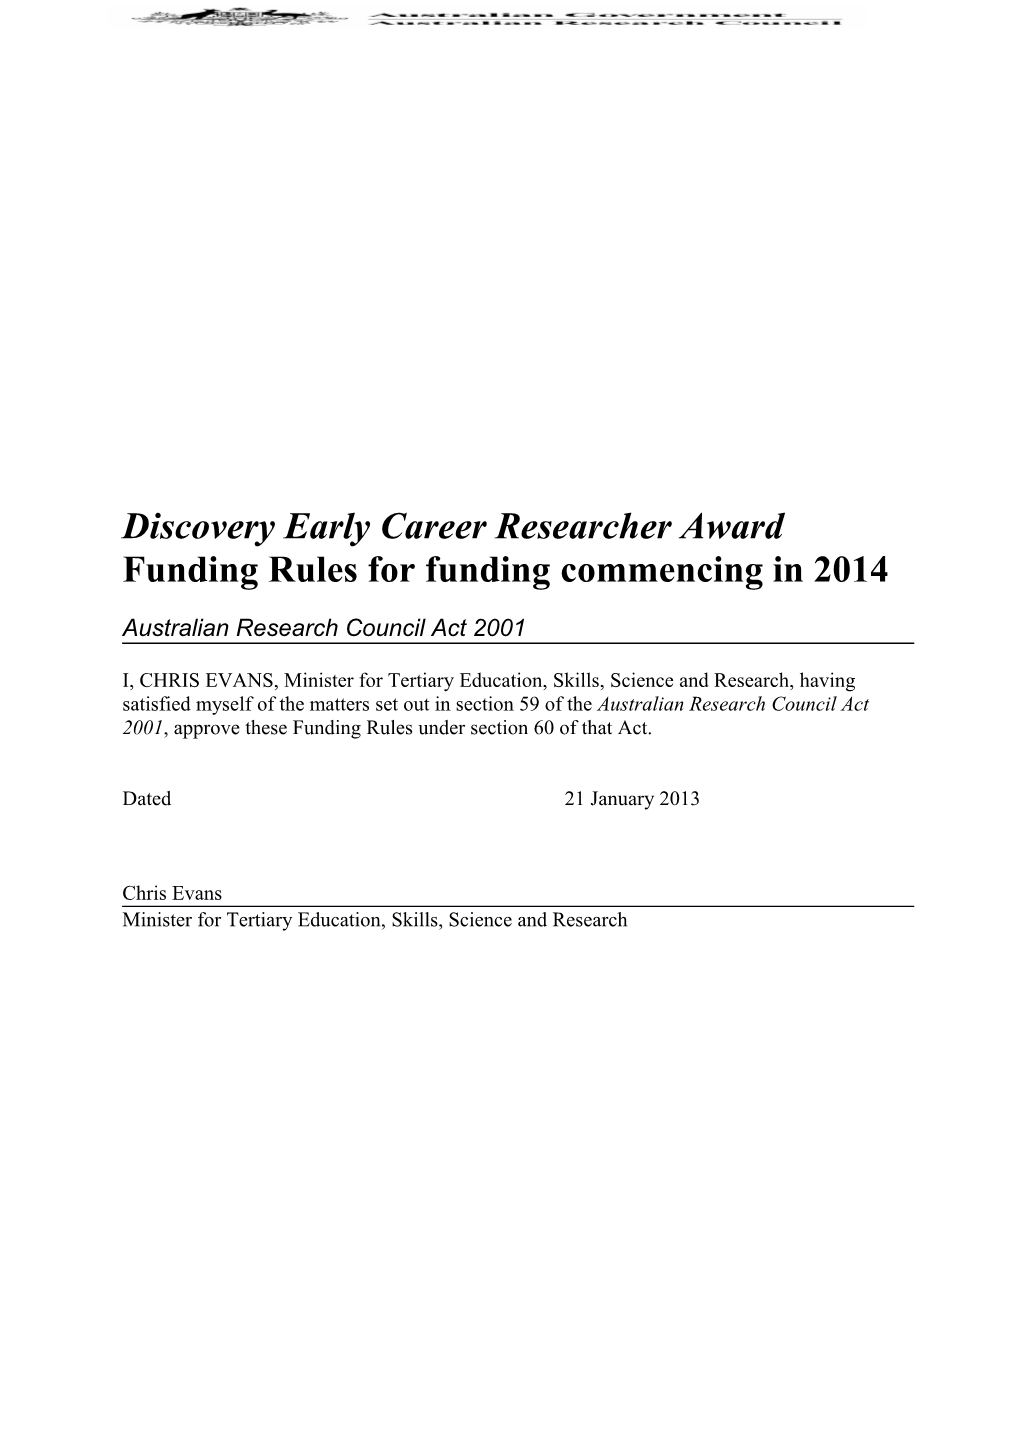 Discovery Early Career Researcher Awardfunding Rules for Funding Commencing in 2014